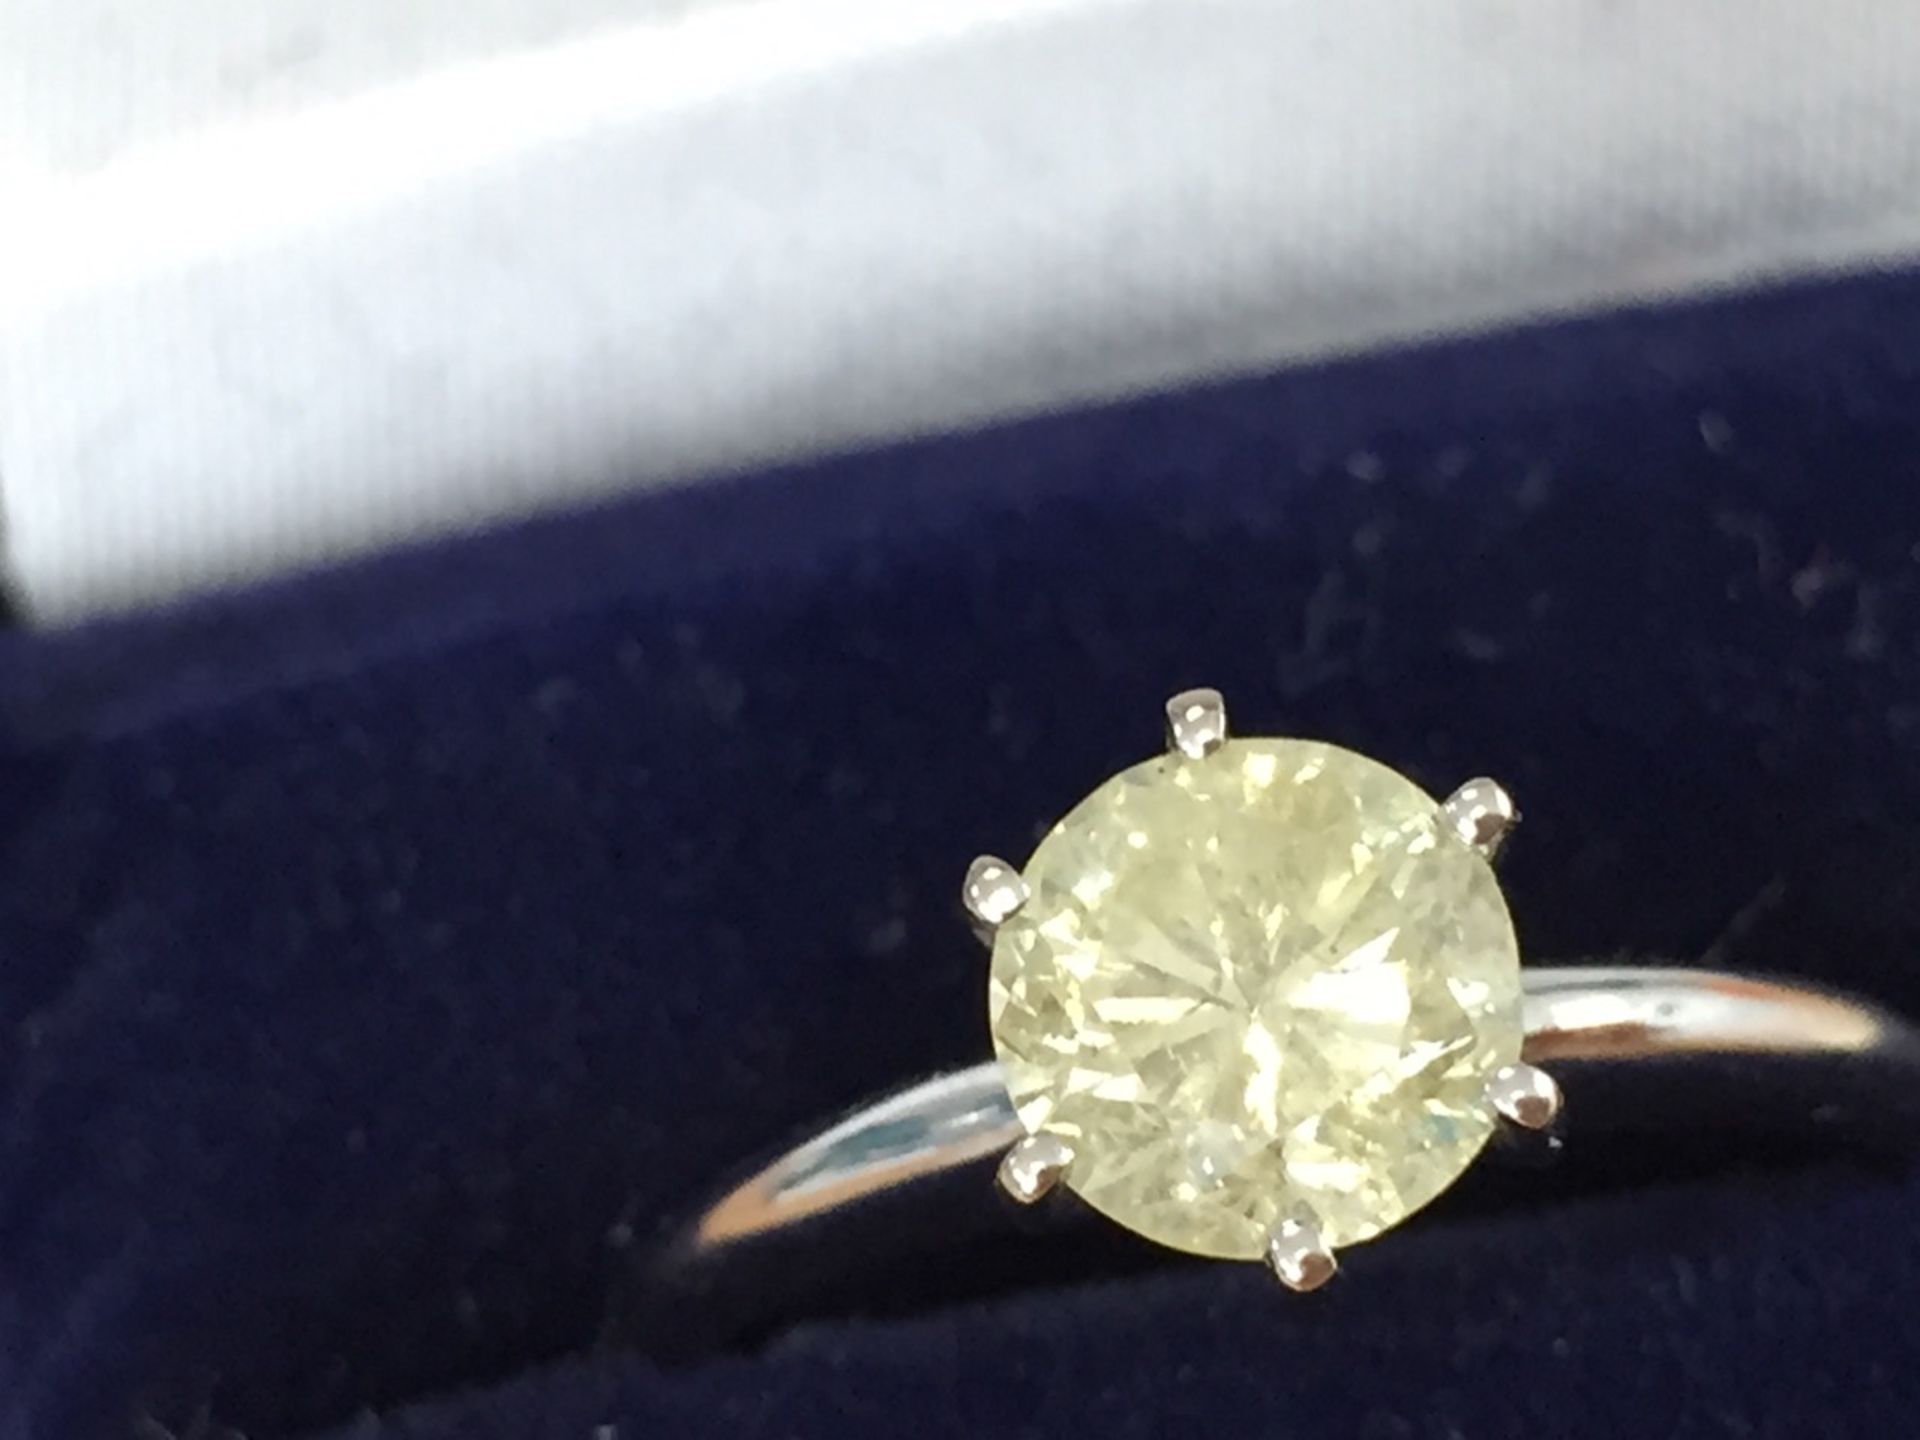 1.1 Carat Diamond - Solitaire Engagement Ring - Image 4 of 12